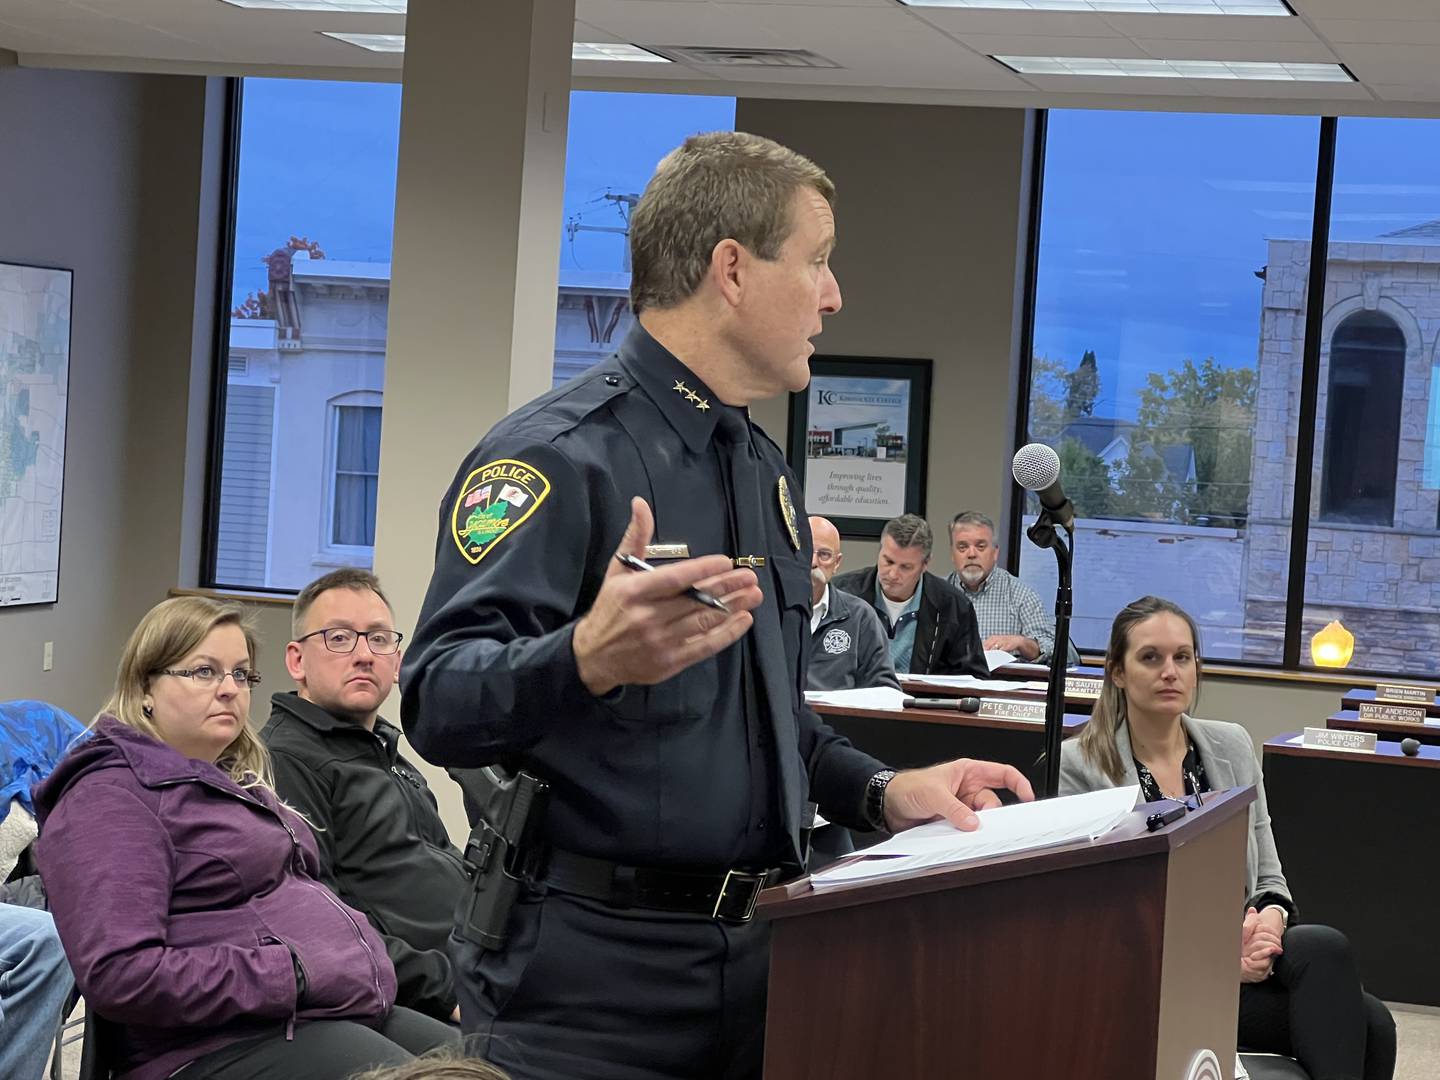 Sycamore Police Chief Jim Winters addresses the Sycamore City Council on  Oct. 17, 2022 when he presents the Sycamore Police Department's five-year plan.